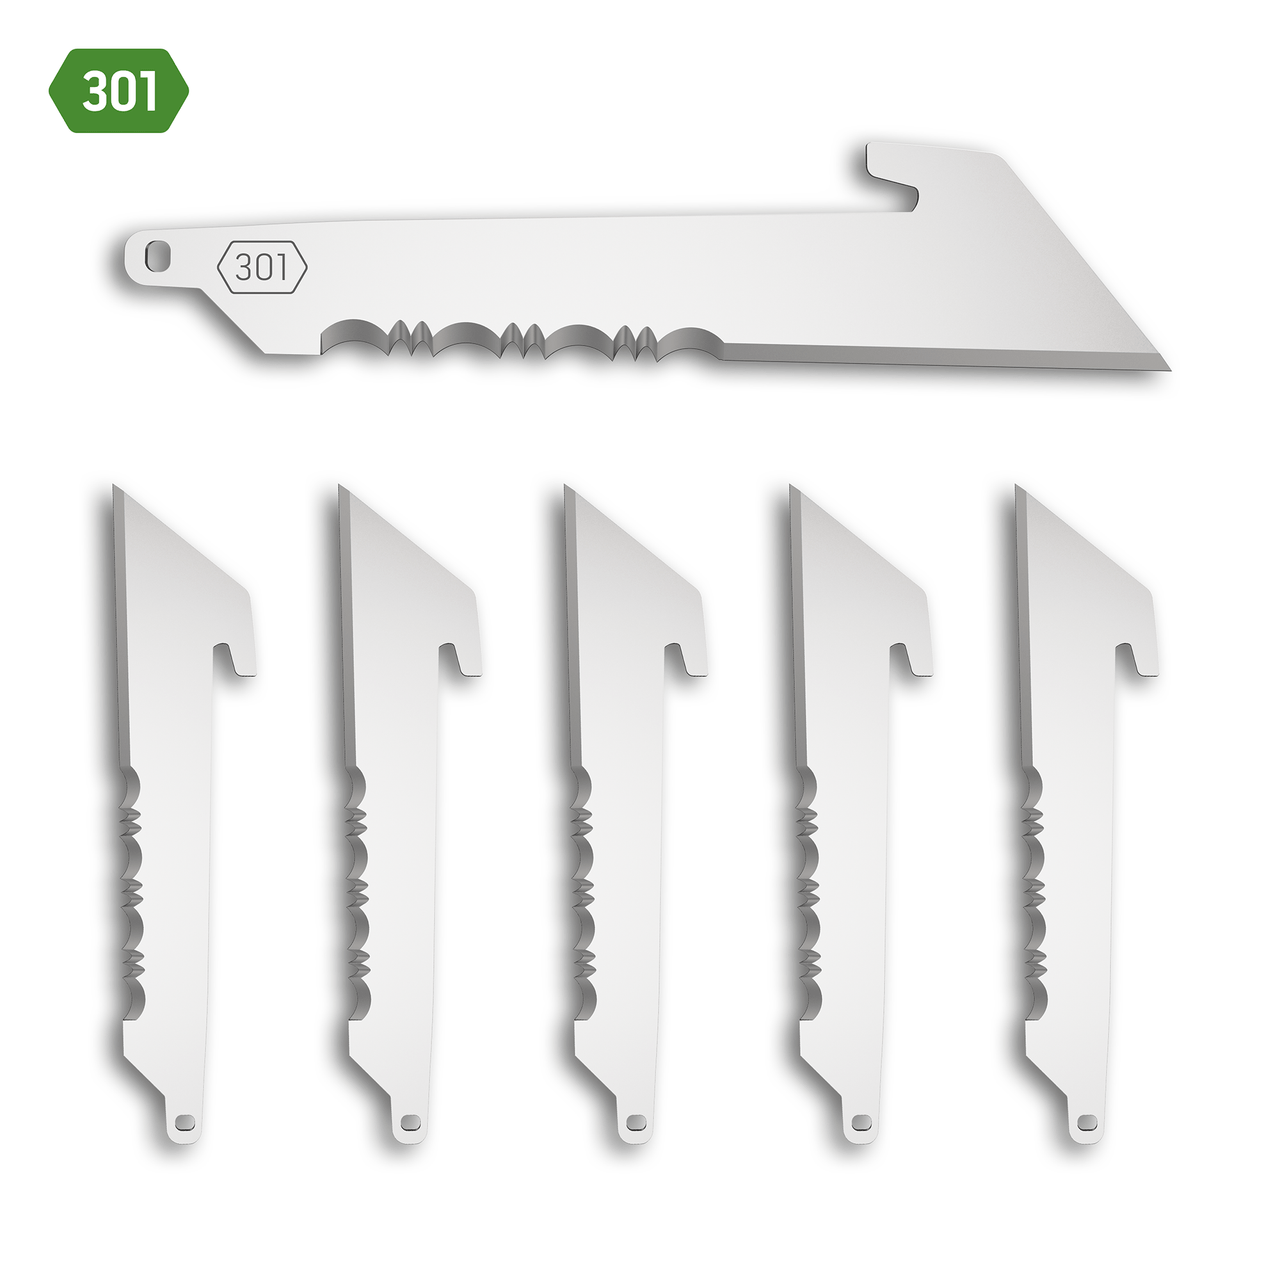 Outdoor Edge Replacement Blades (6 PK) 3.0" 420J2 Japanese Stainless Steel Satin Partially Serrated Replacement Blades -301